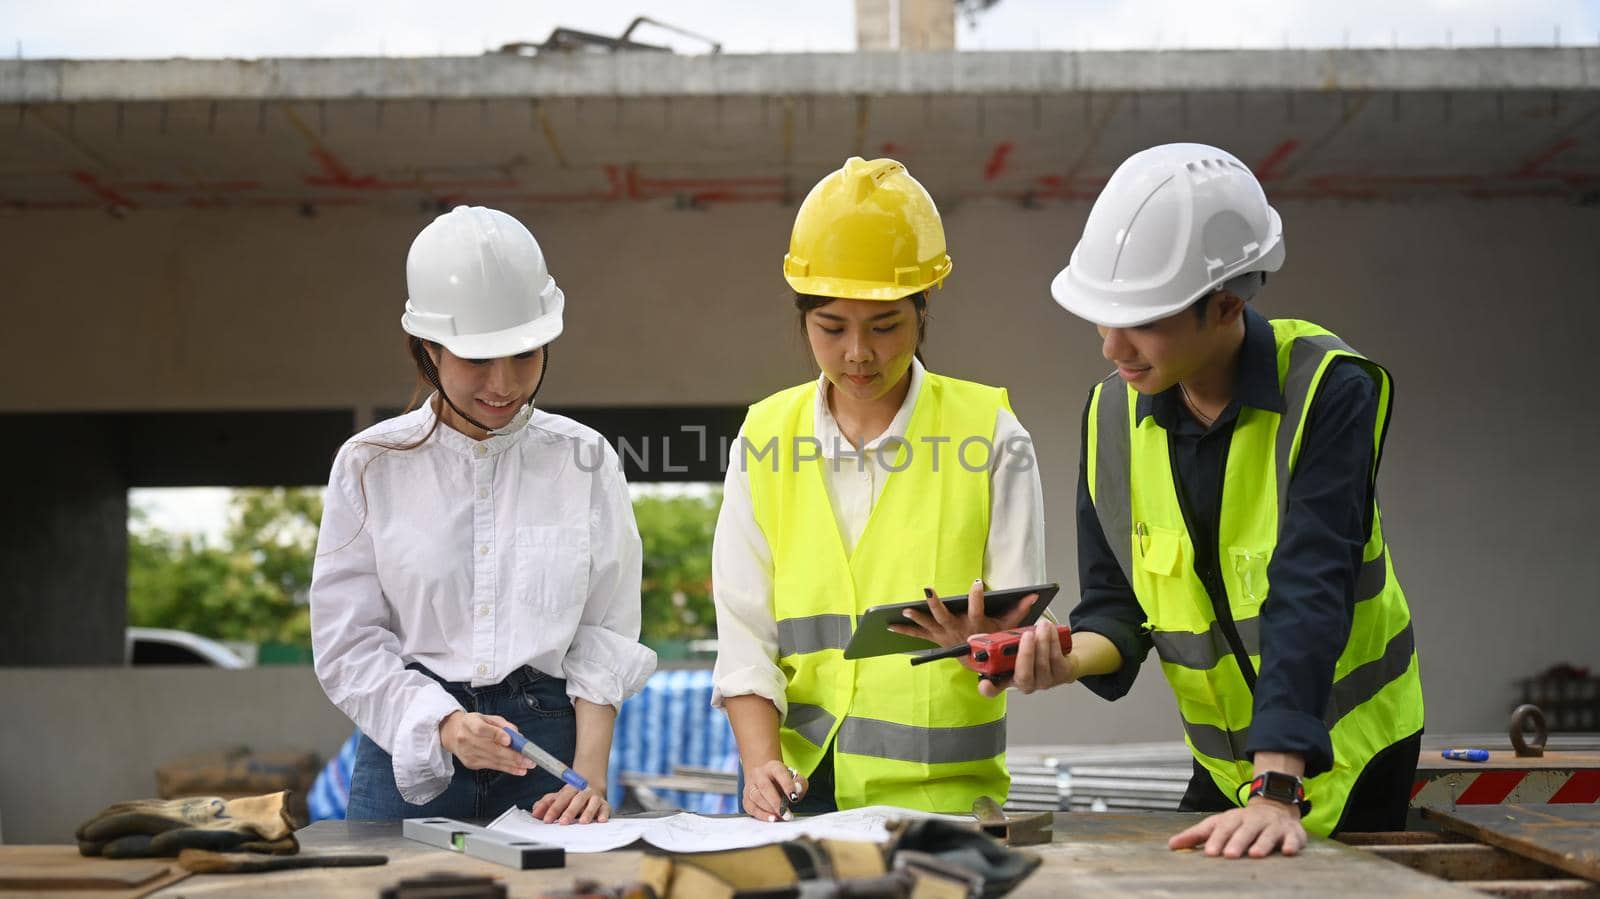 Architect team in safety helmet using digital tablet and working with blueprints during inspecting construction site by prathanchorruangsak